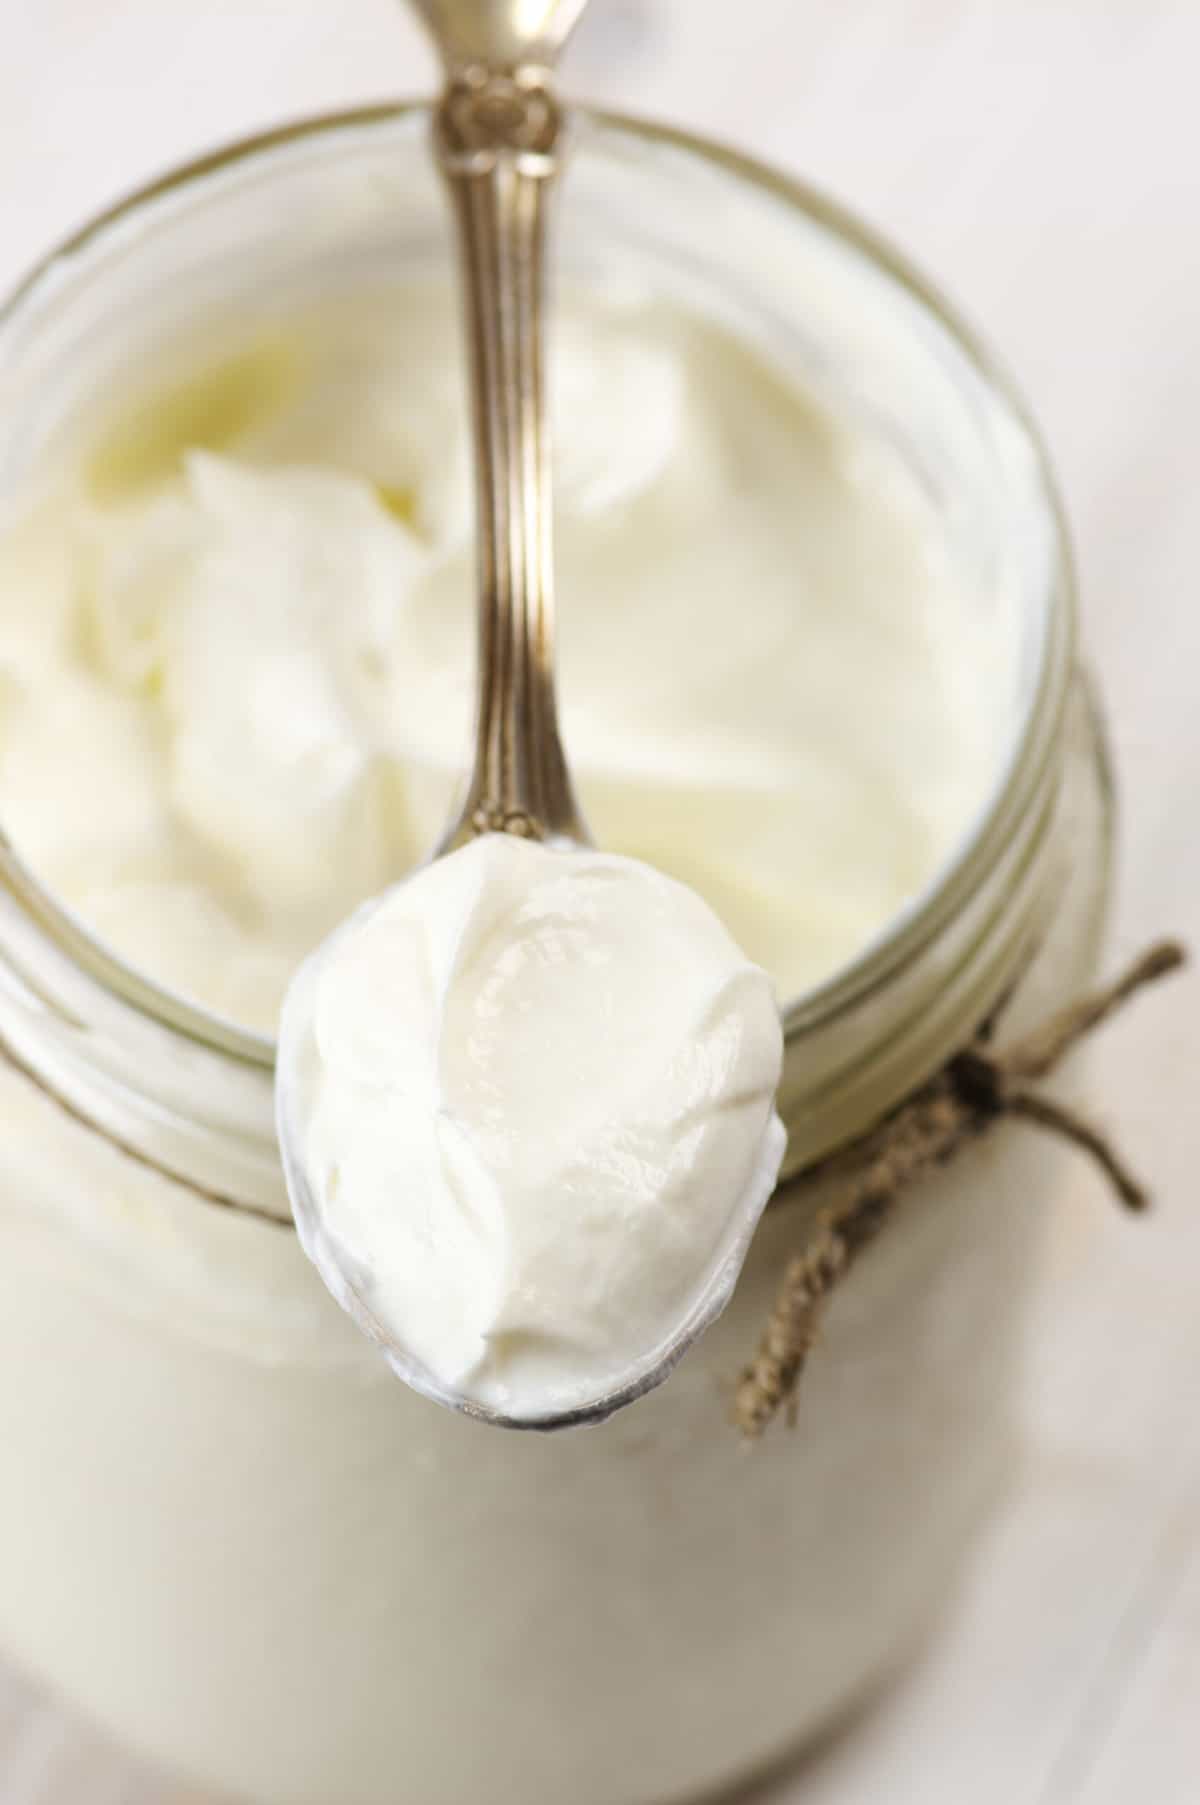 Homemade sour cream in glass jar with spoon close-up on rustic white wooden table.